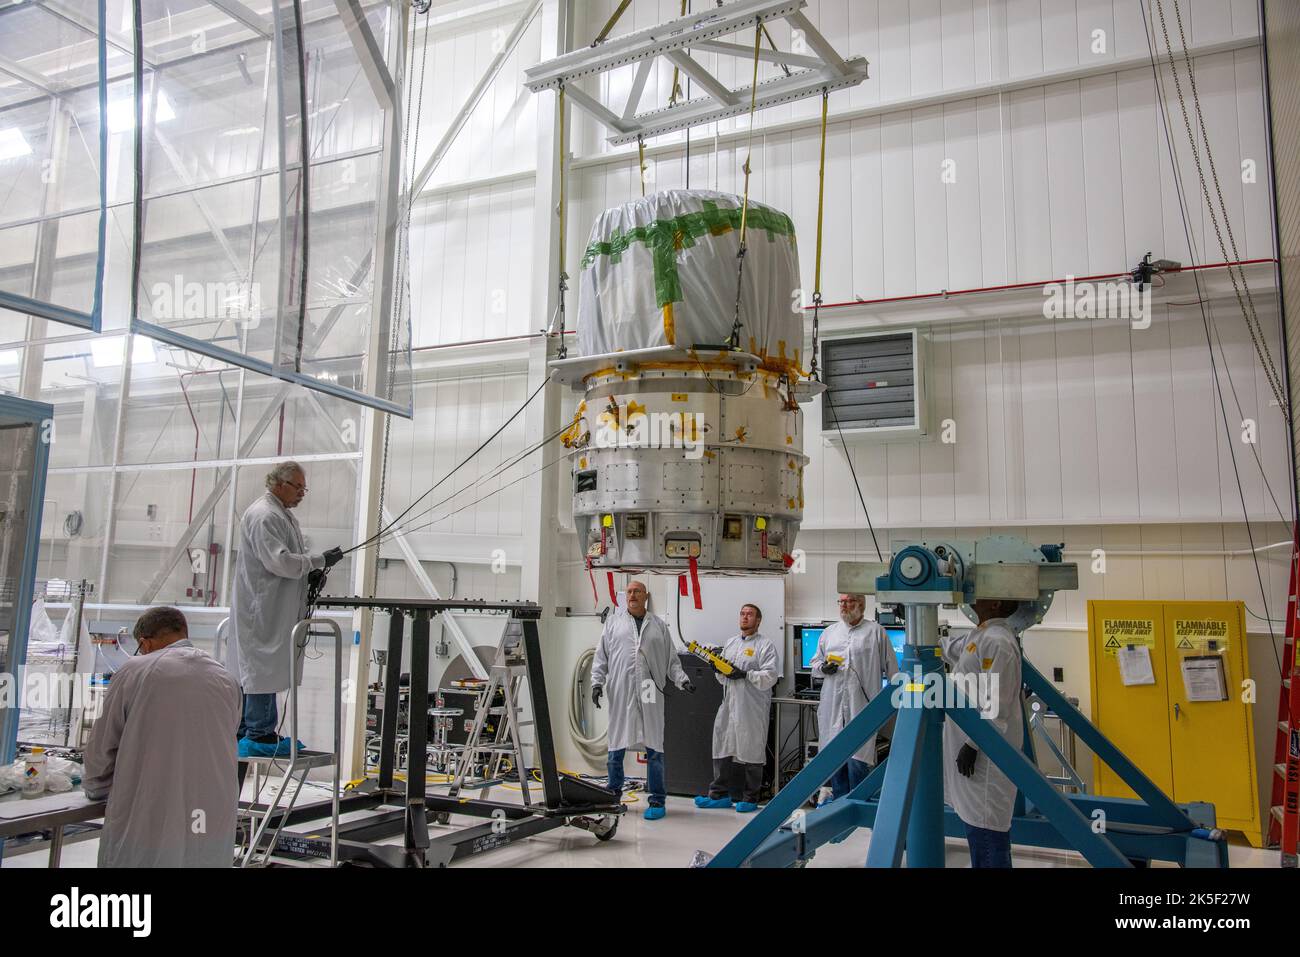 The Low-Earth Orbit Flight Test of an Inflatable Decelerator (LOFTID) is lifted for its move to a work stand inside Building 836 at Vandenberg Space Force Base (VSFB) in California on Aug. 25, 2022. LOFTID is the secondary payload on NASA and the National Oceanic and Atmospheric Administration’s (NOAA) Joint Polar Satellite System-2 (JPSS-2) satellite mission. JPSS-2 is the third satellite in the Joint Polar Satellite System series. It is scheduled to lift off from VSFB on Nov. 1 from Space Launch Complex-3. JPSS-2, which will be renamed NOAA-21 after reaching orbit, will join a constellation Stock Photo